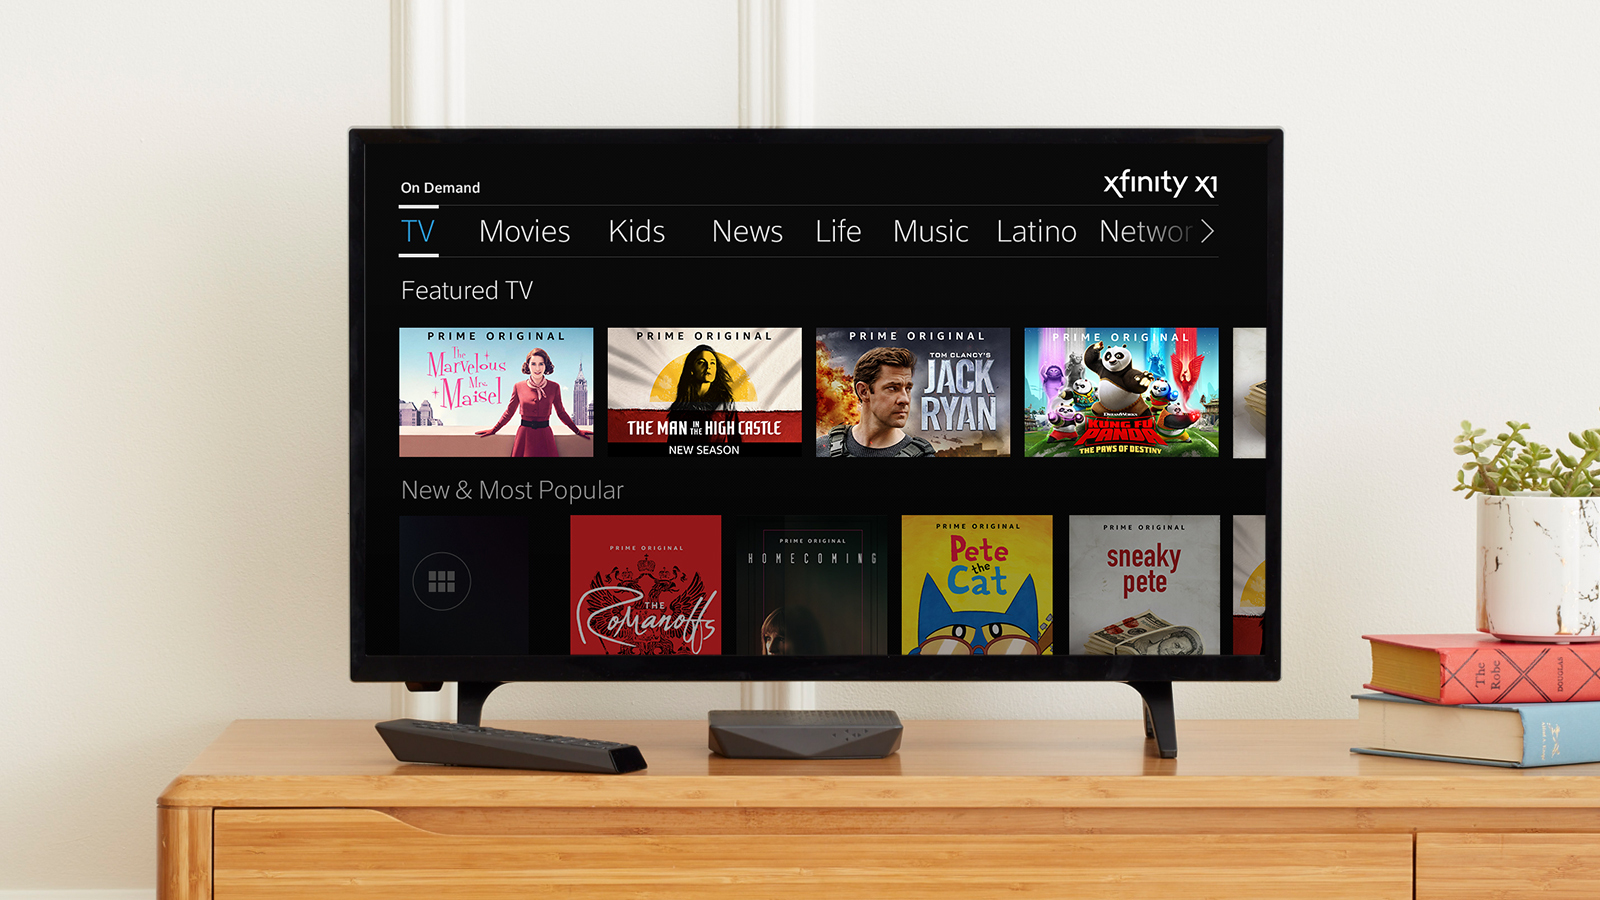 Comcast To Launch Amazon Prime Video On Xfinity X1 Nationwide